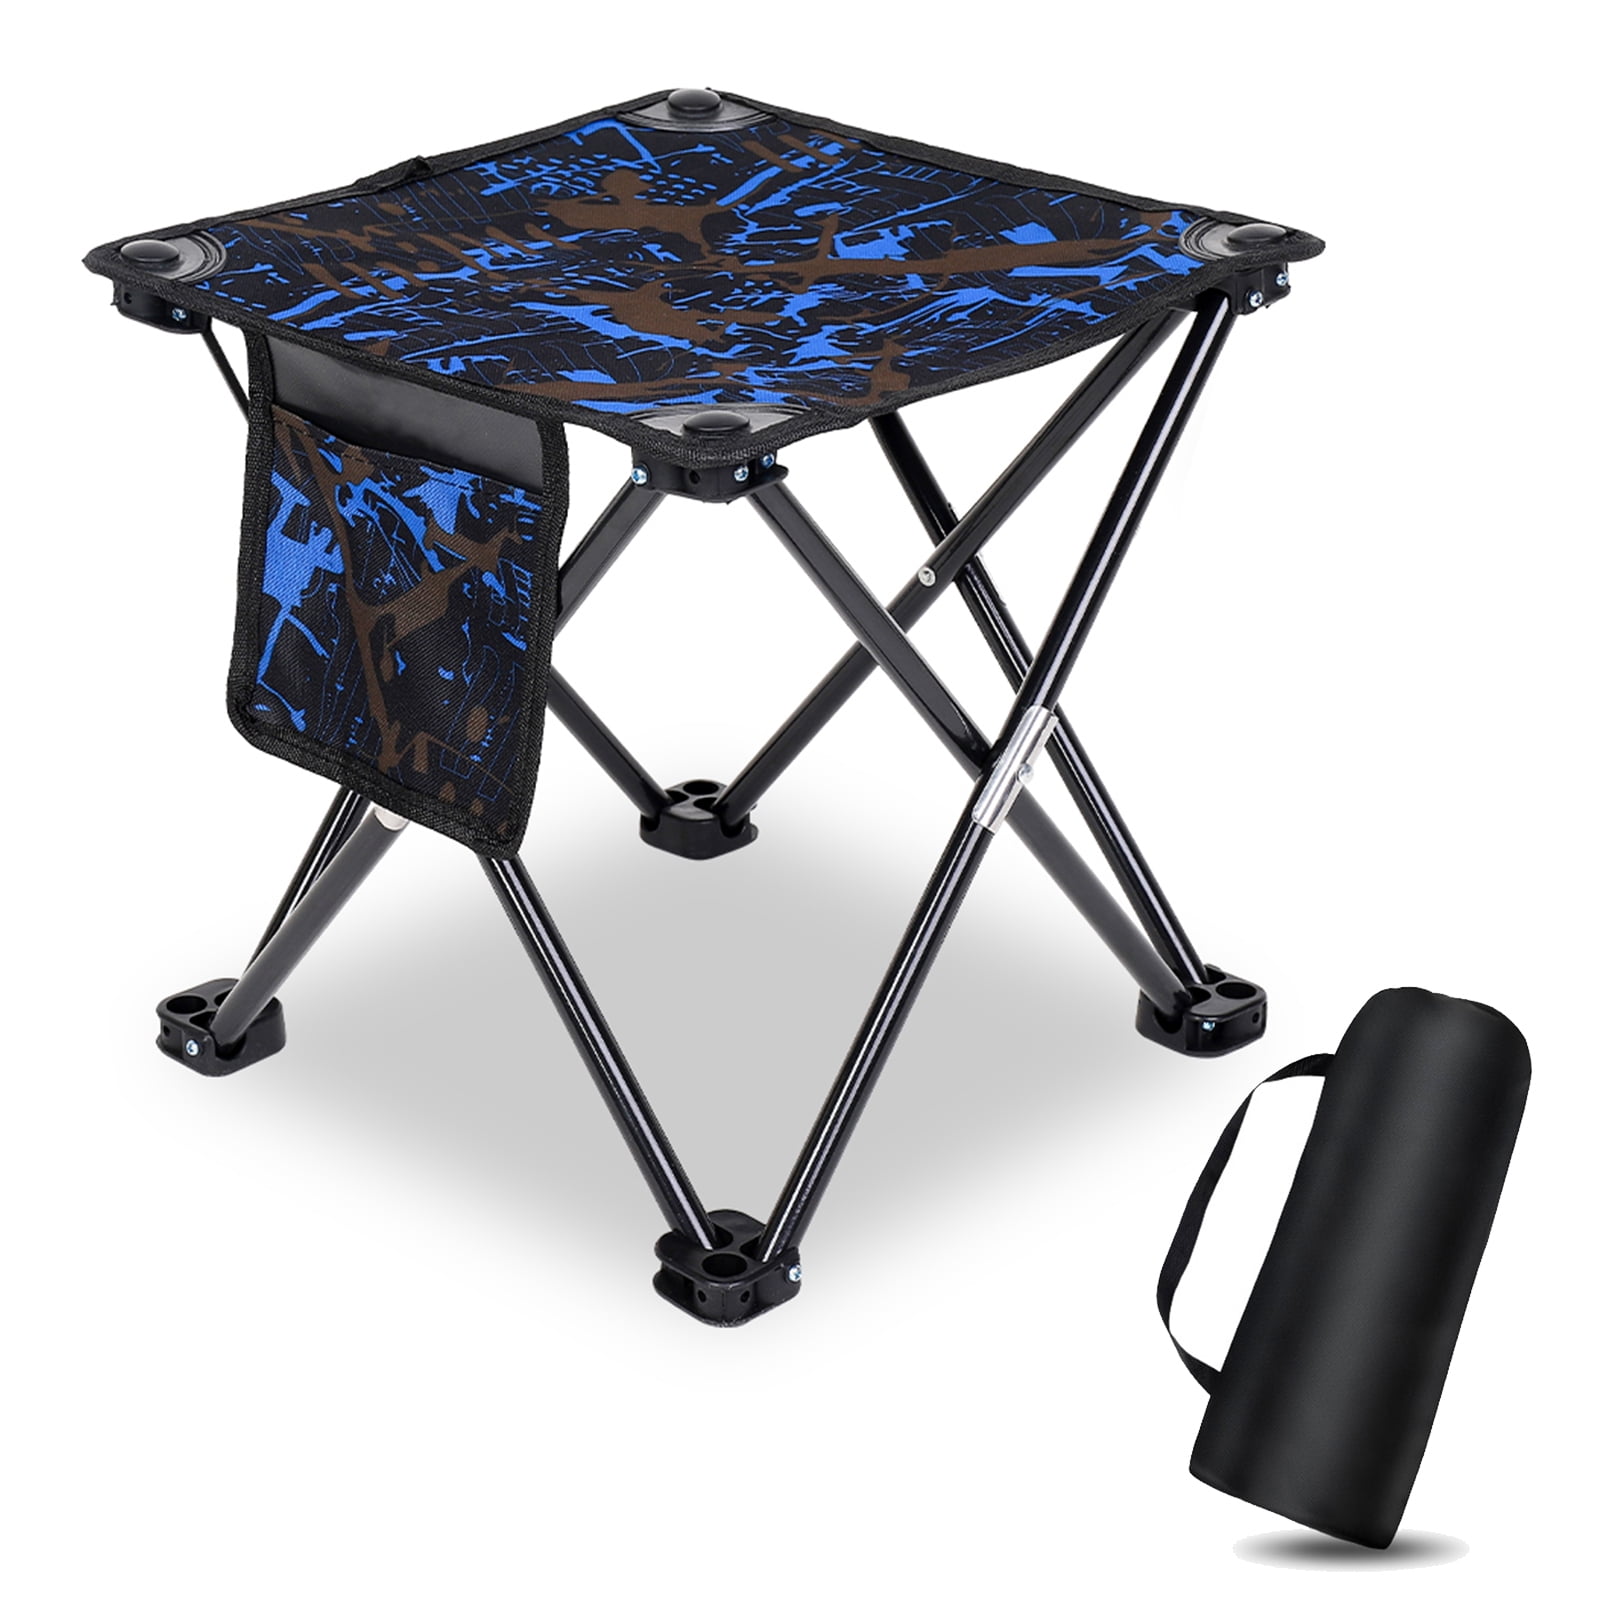 Yaoping Folding Camping Stool, Camouflage Portable Outdoor